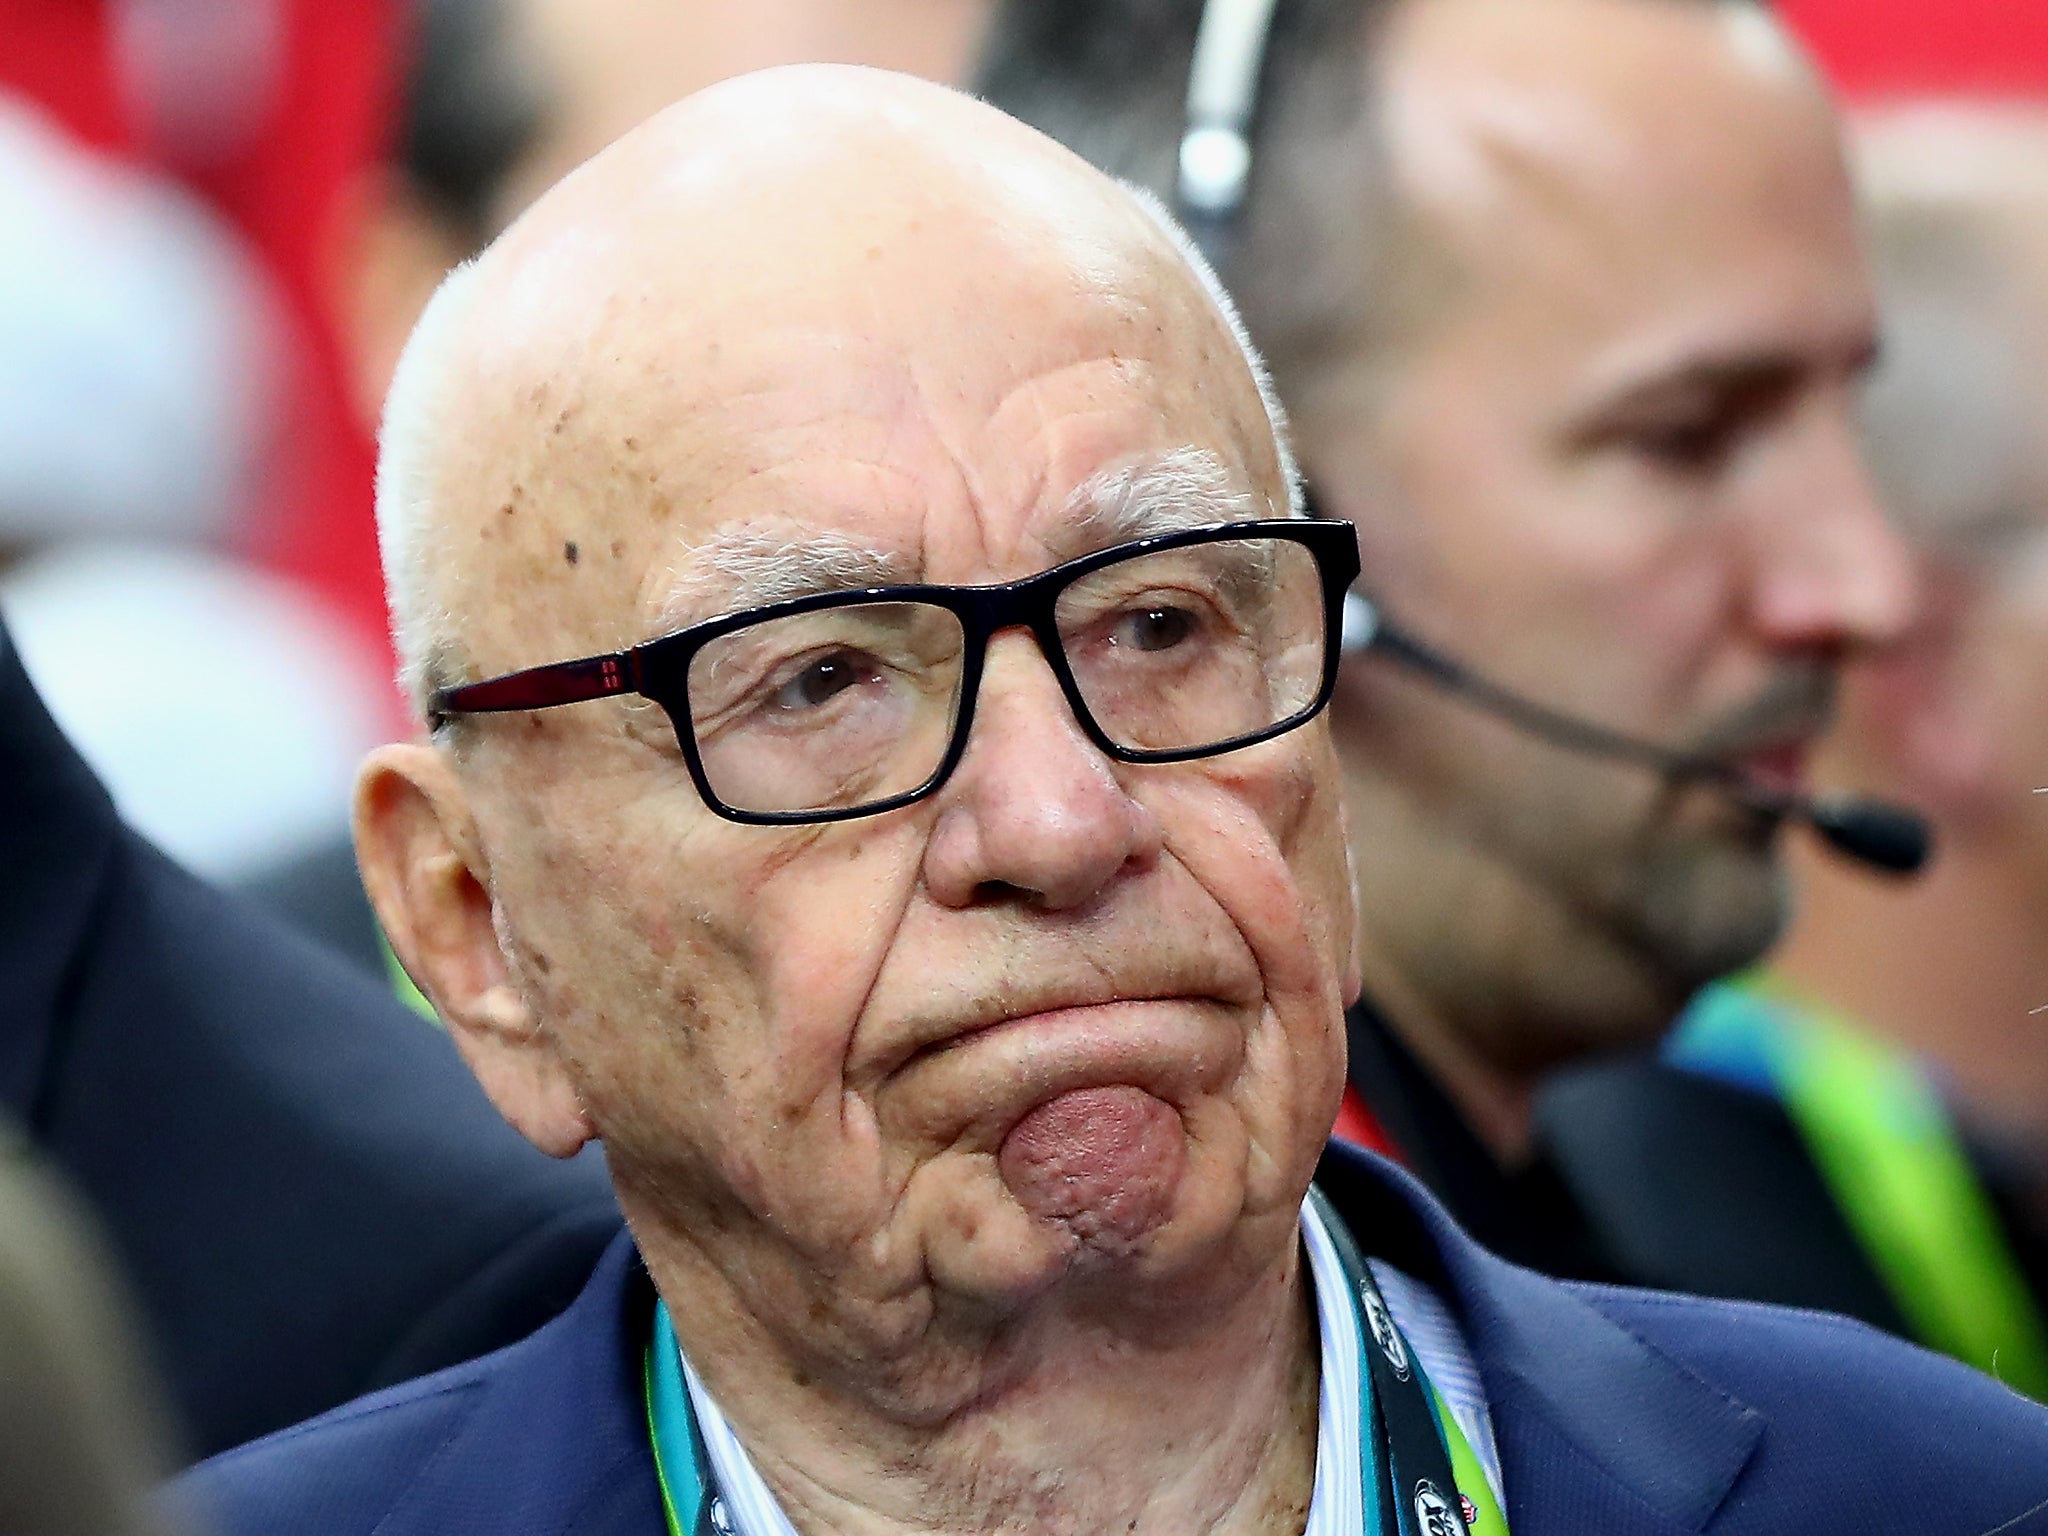 Rupert Murdoch’s Fox will now acquire the portion of Sky it did not already own